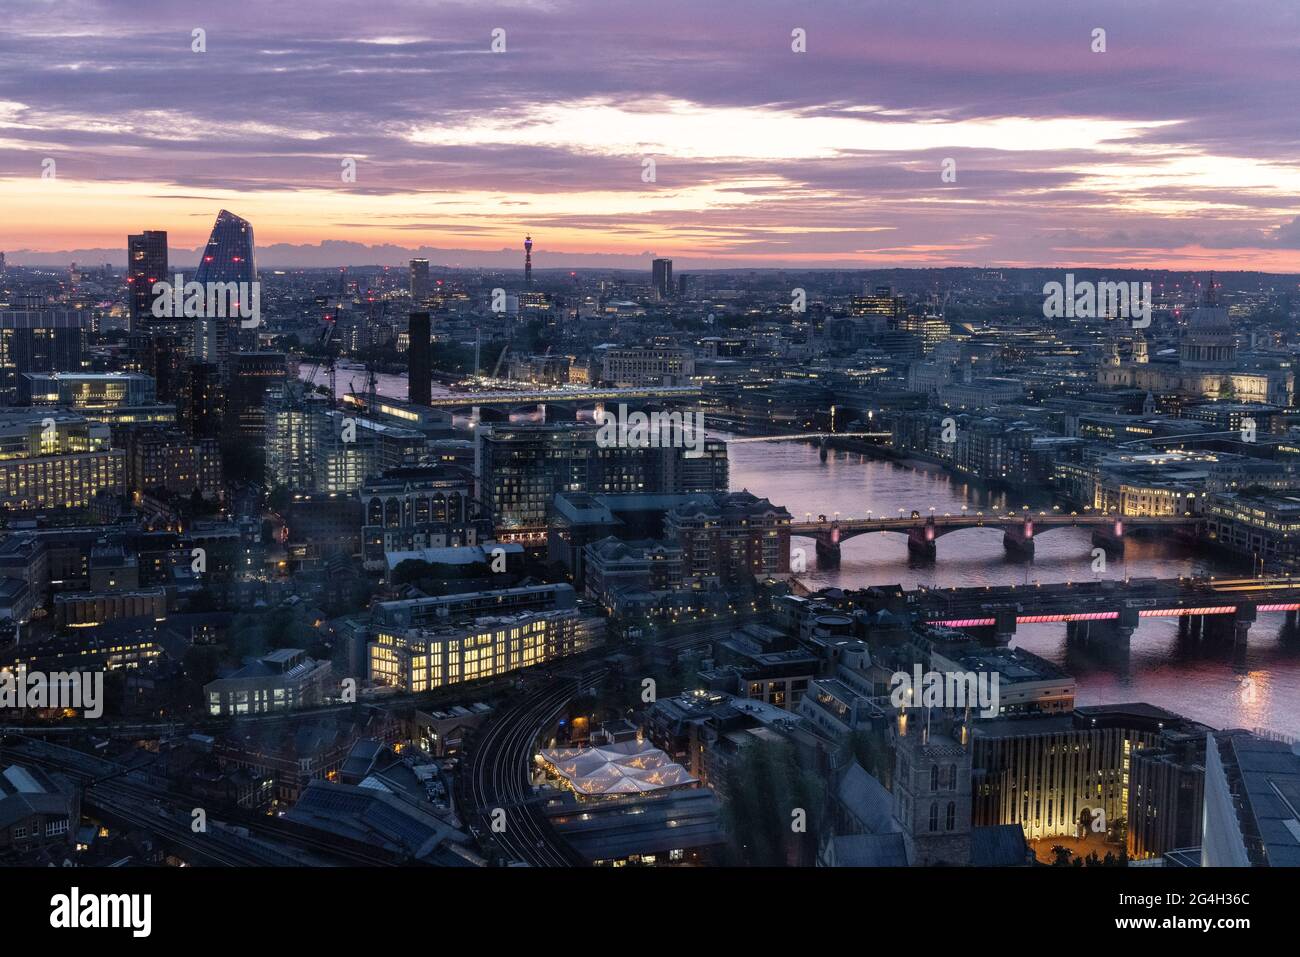 London skyline at dusk,- london cityscape  looking west over the river thames from the Shard; London UK Stock Photo